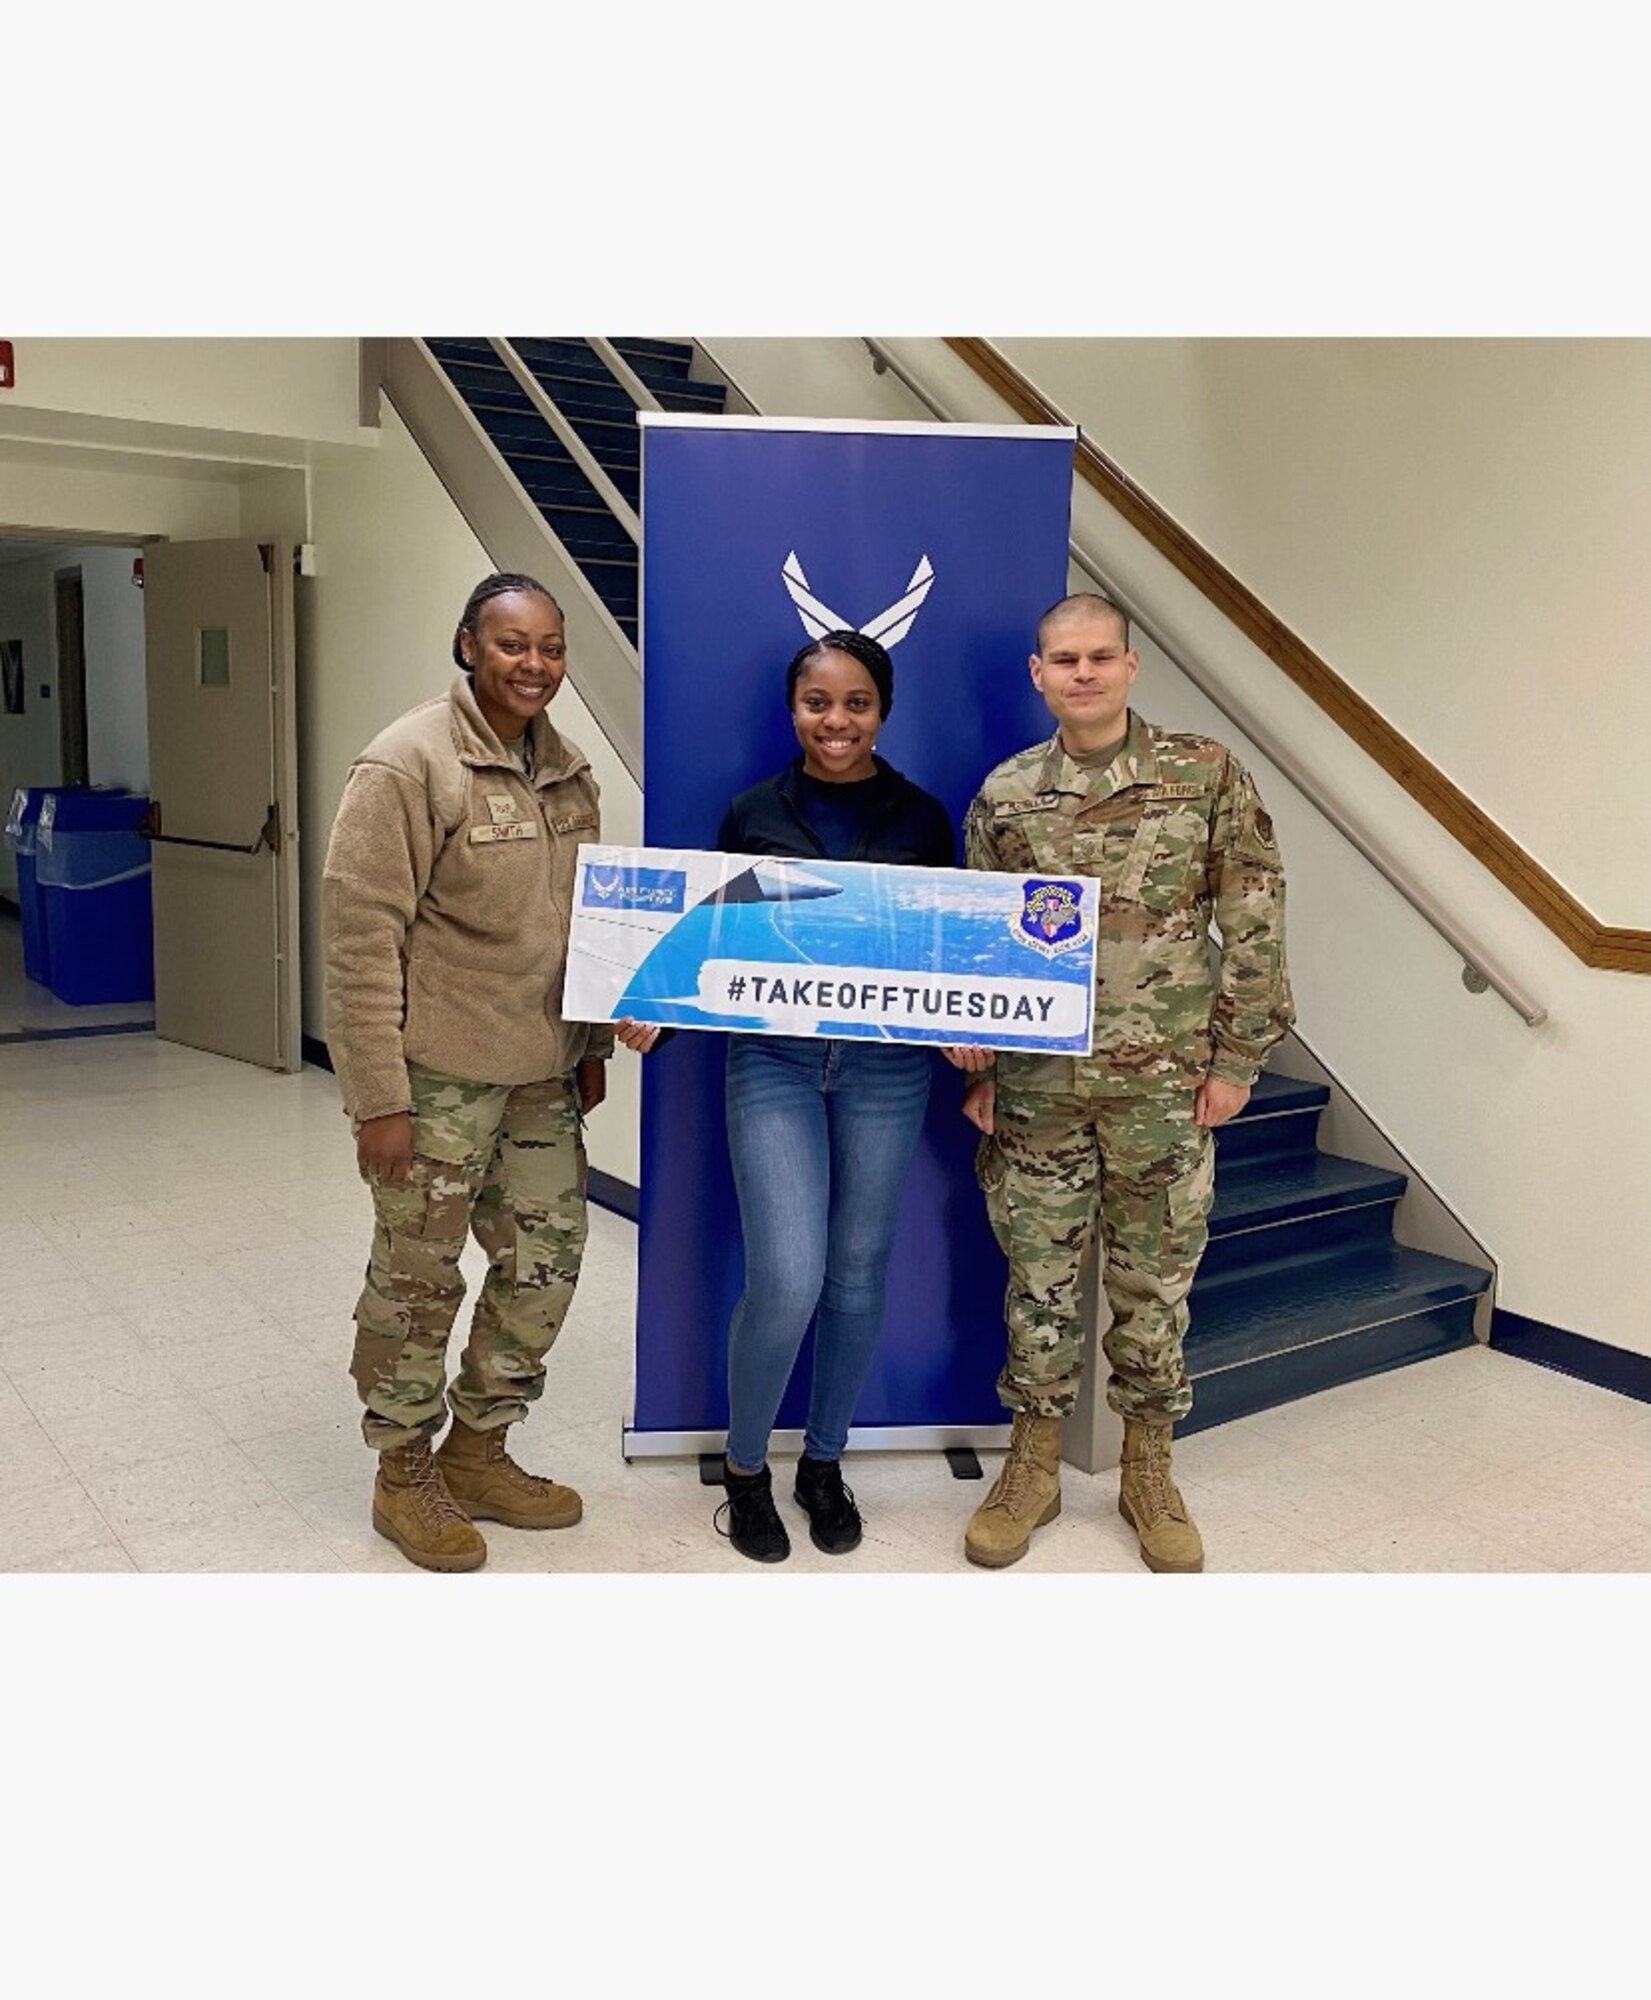 Heading off to Basic Military Training today is Nhytavia Evans from Fredericksburg, VA, who will join 459th Maintenance Squadron! Good Luck and see you soon! #ReserveCitizenAirmen